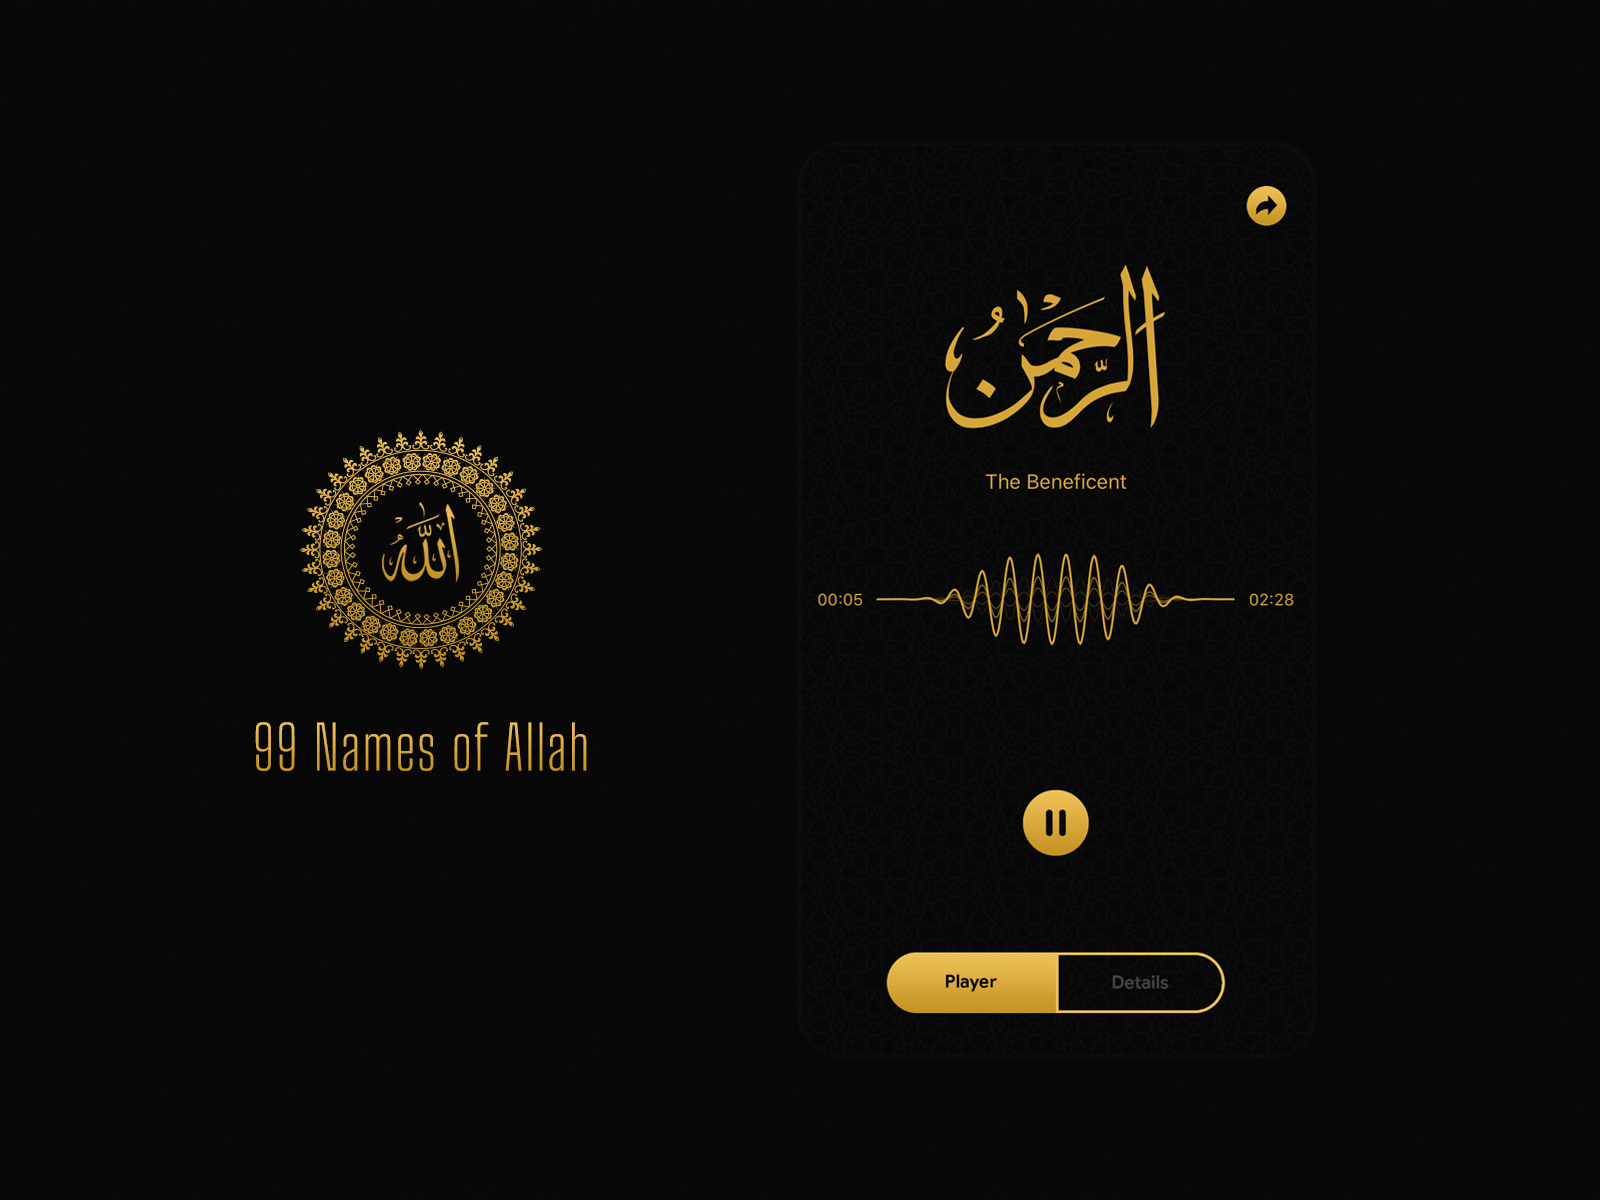 images if the 99 name of allah